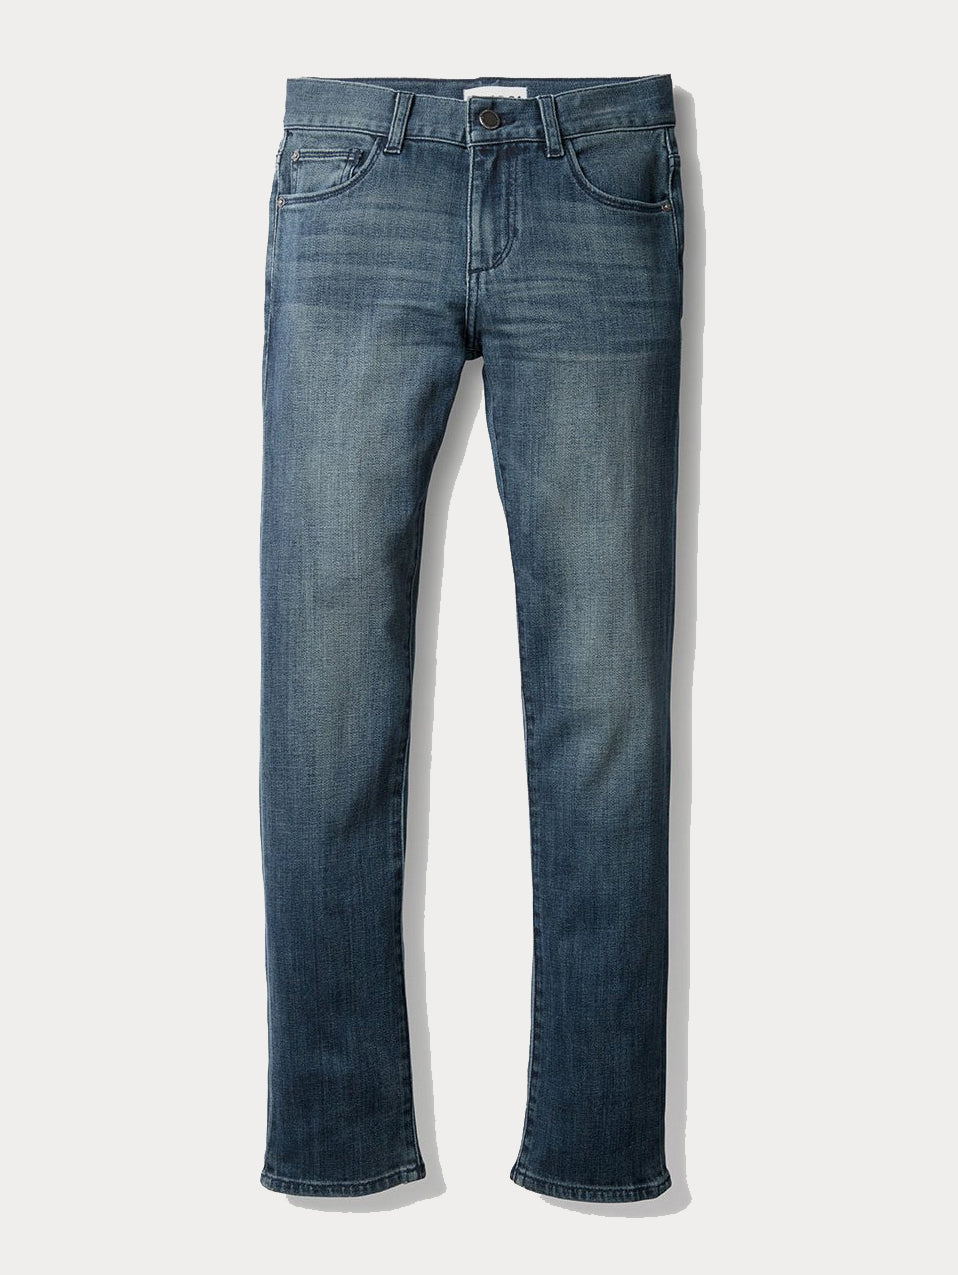 white stag pull on jeans petite